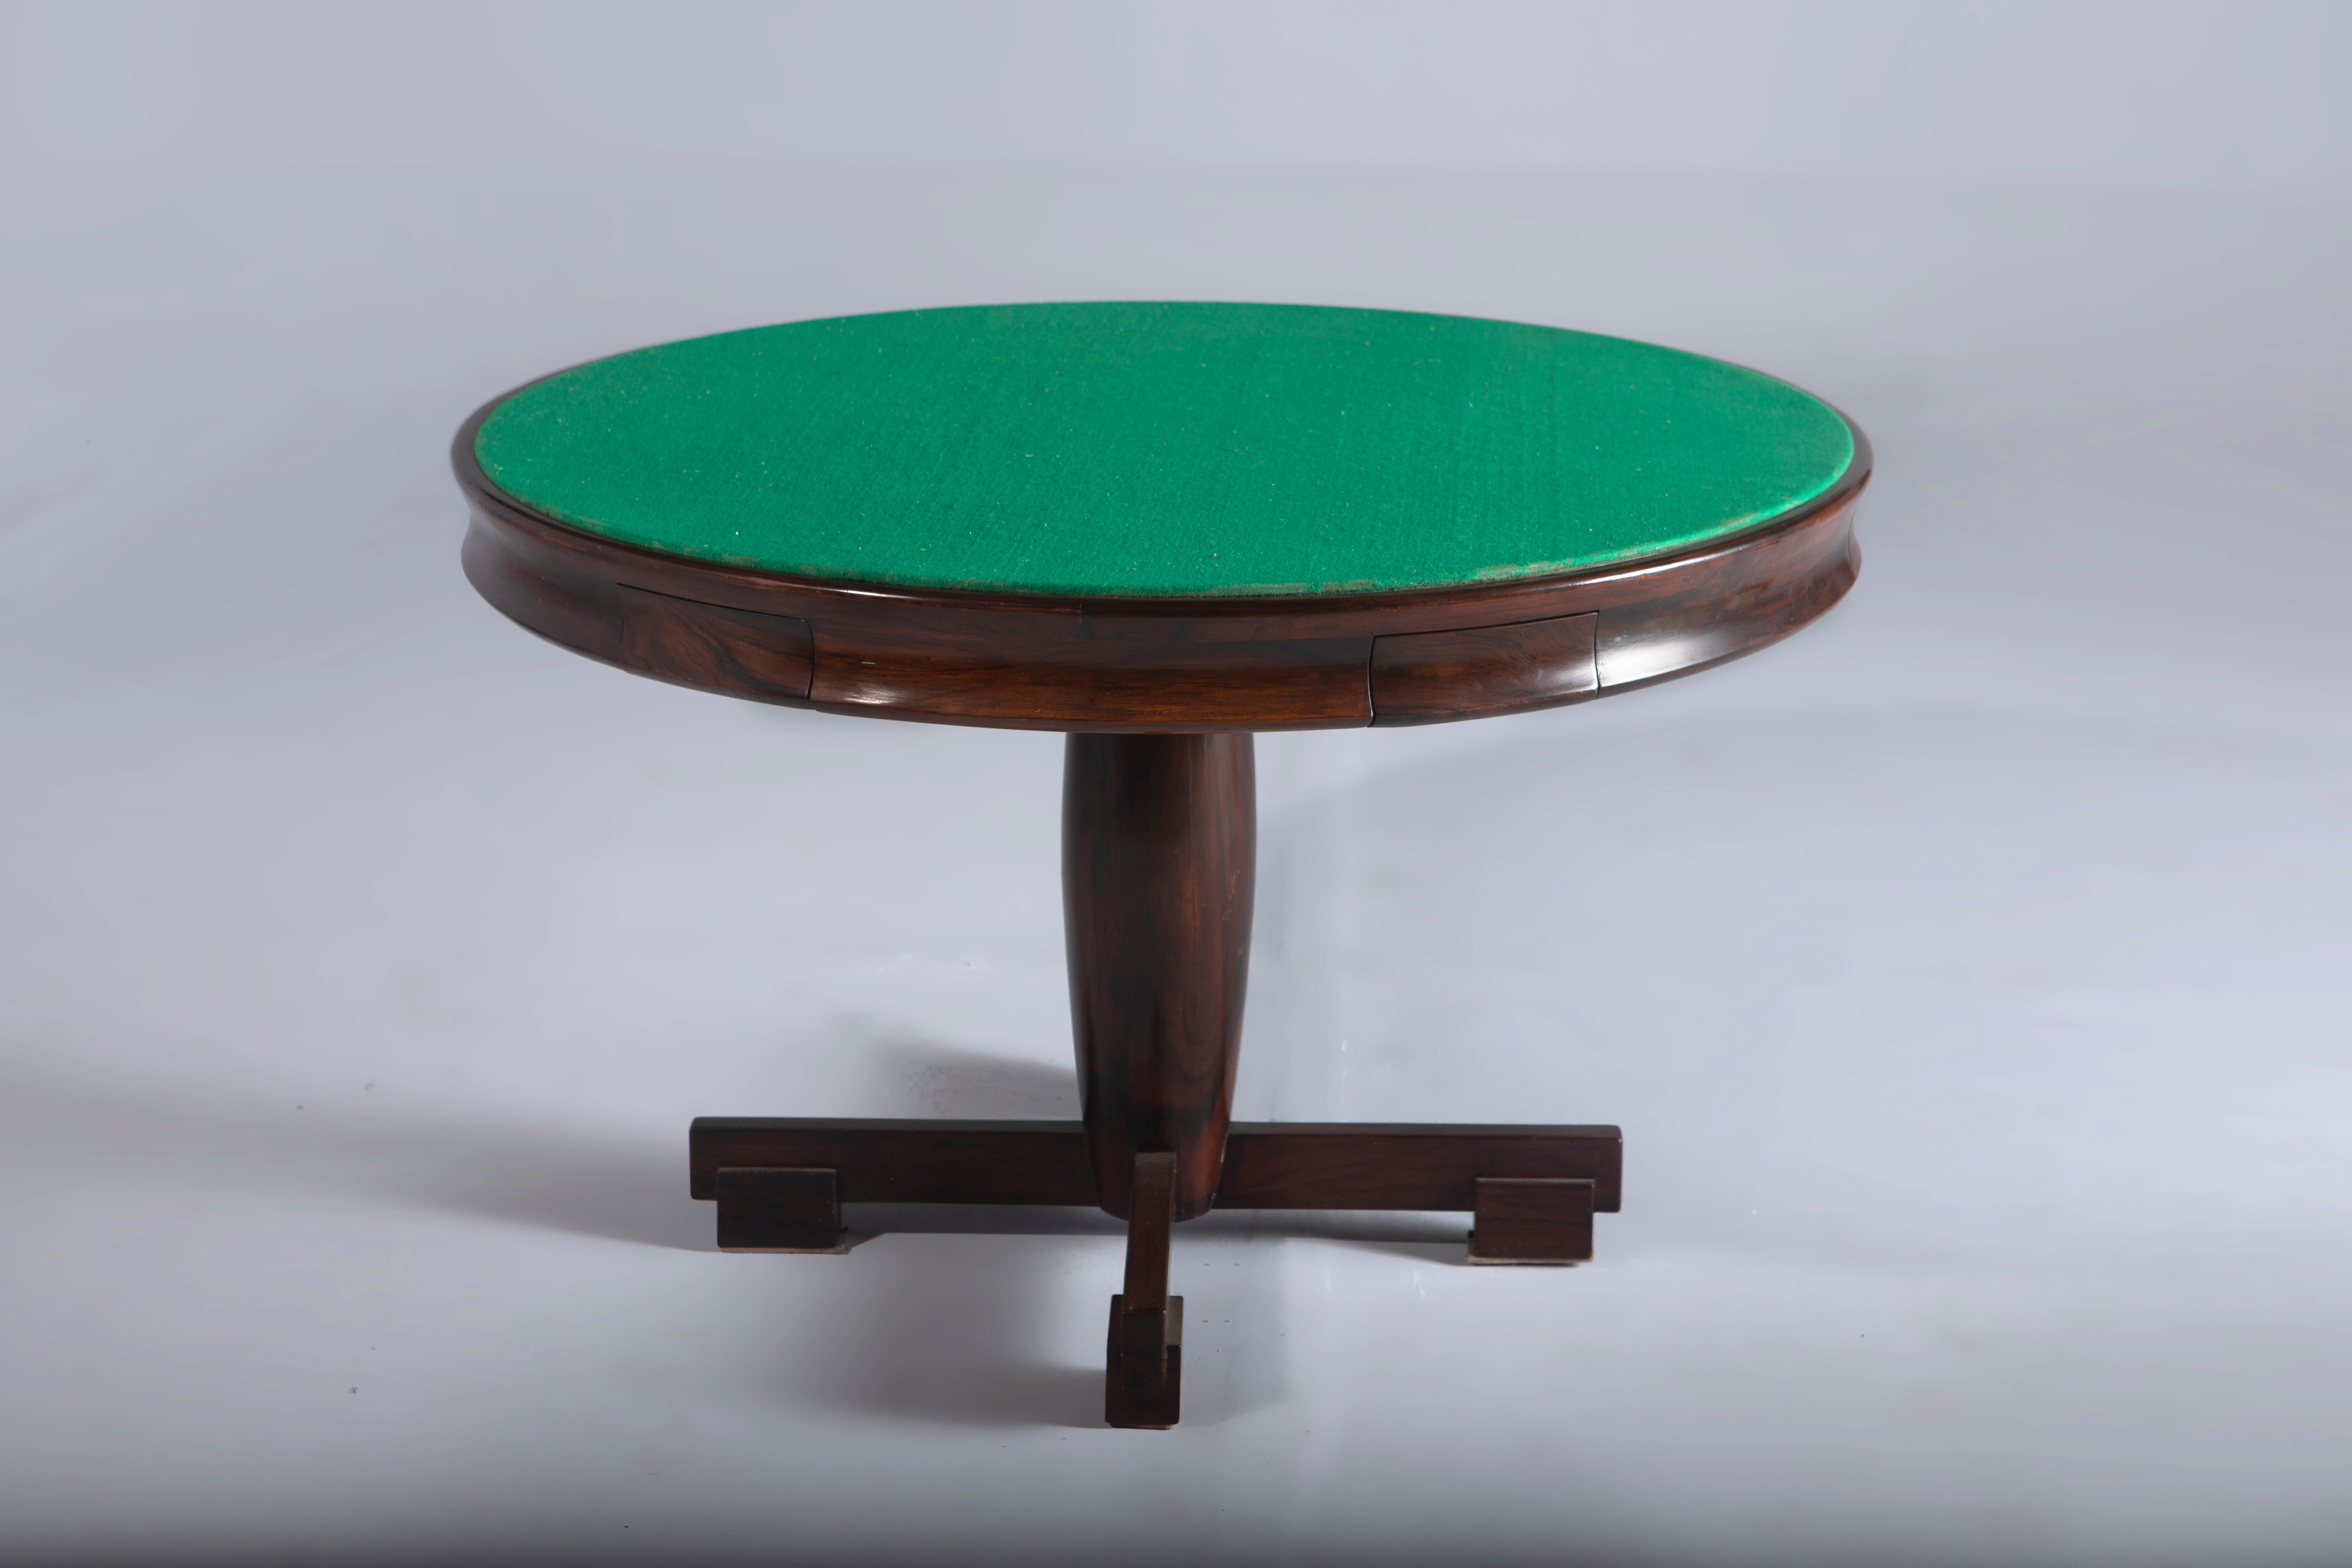 Varnished Mid-Century Modern Game Table with Reversible Top by Sergio Rodrigues, 1950s